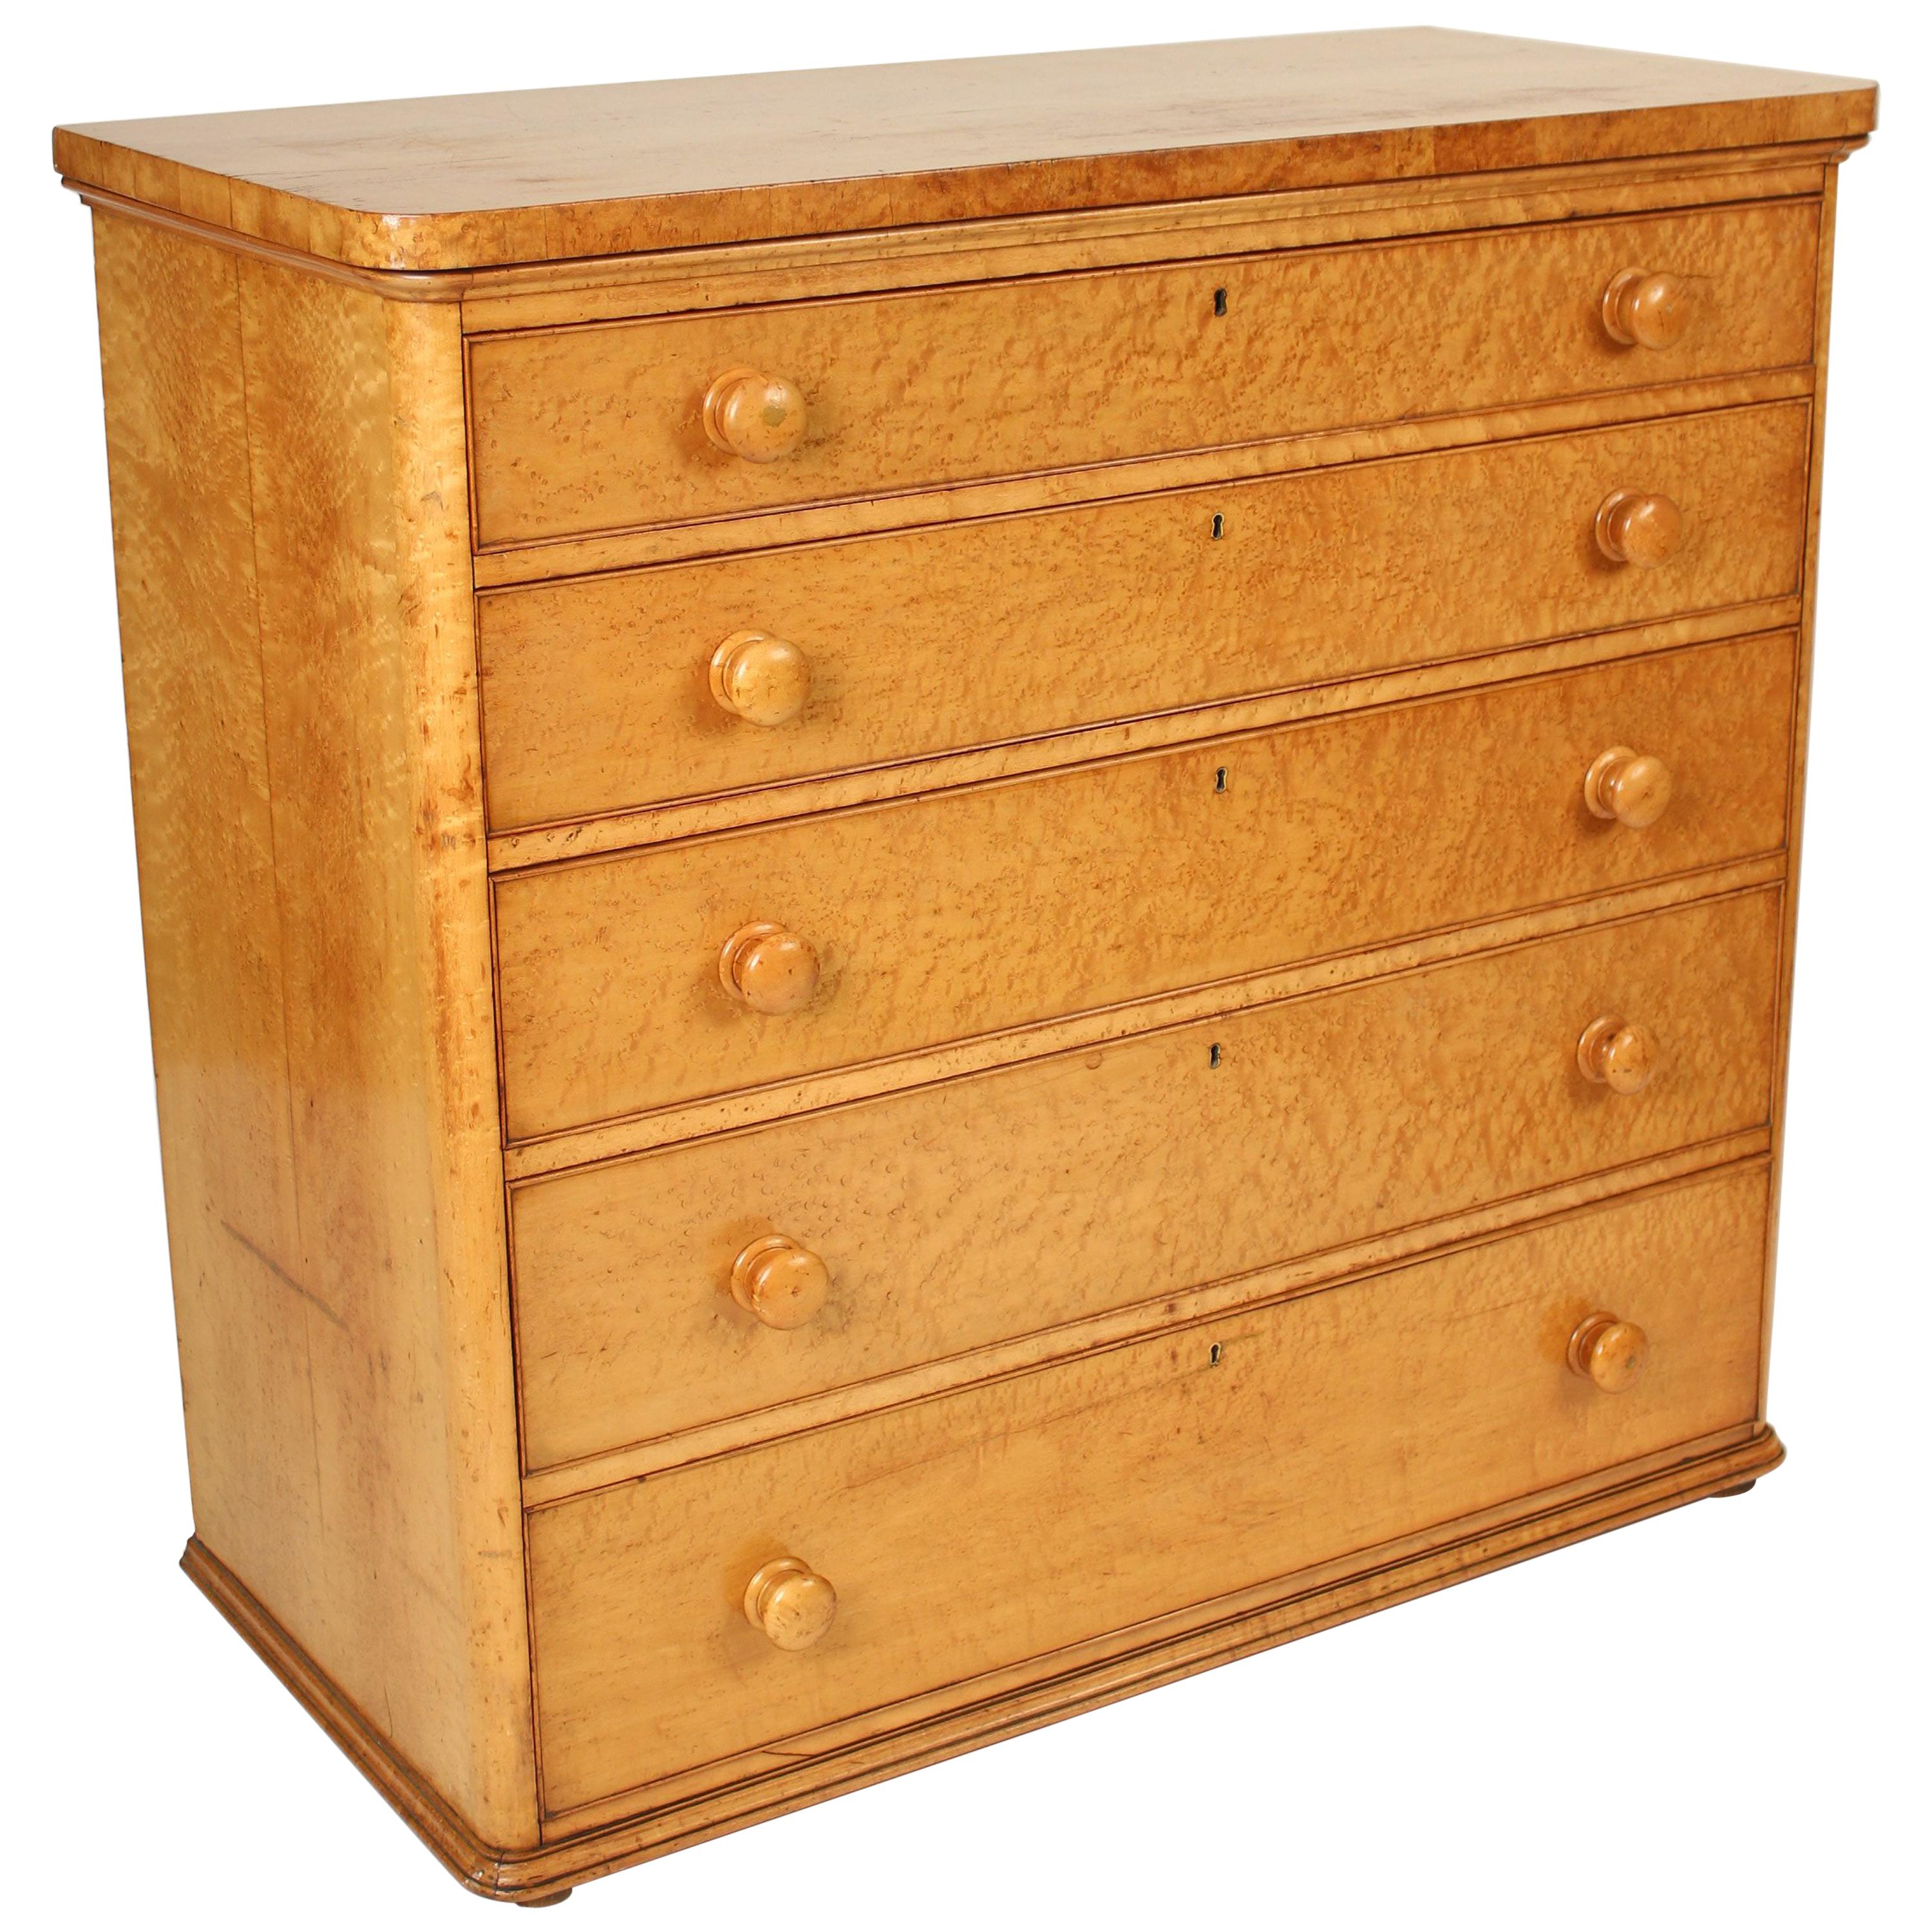 William IV Style Bird's-Eye Maple Chest of Drawers